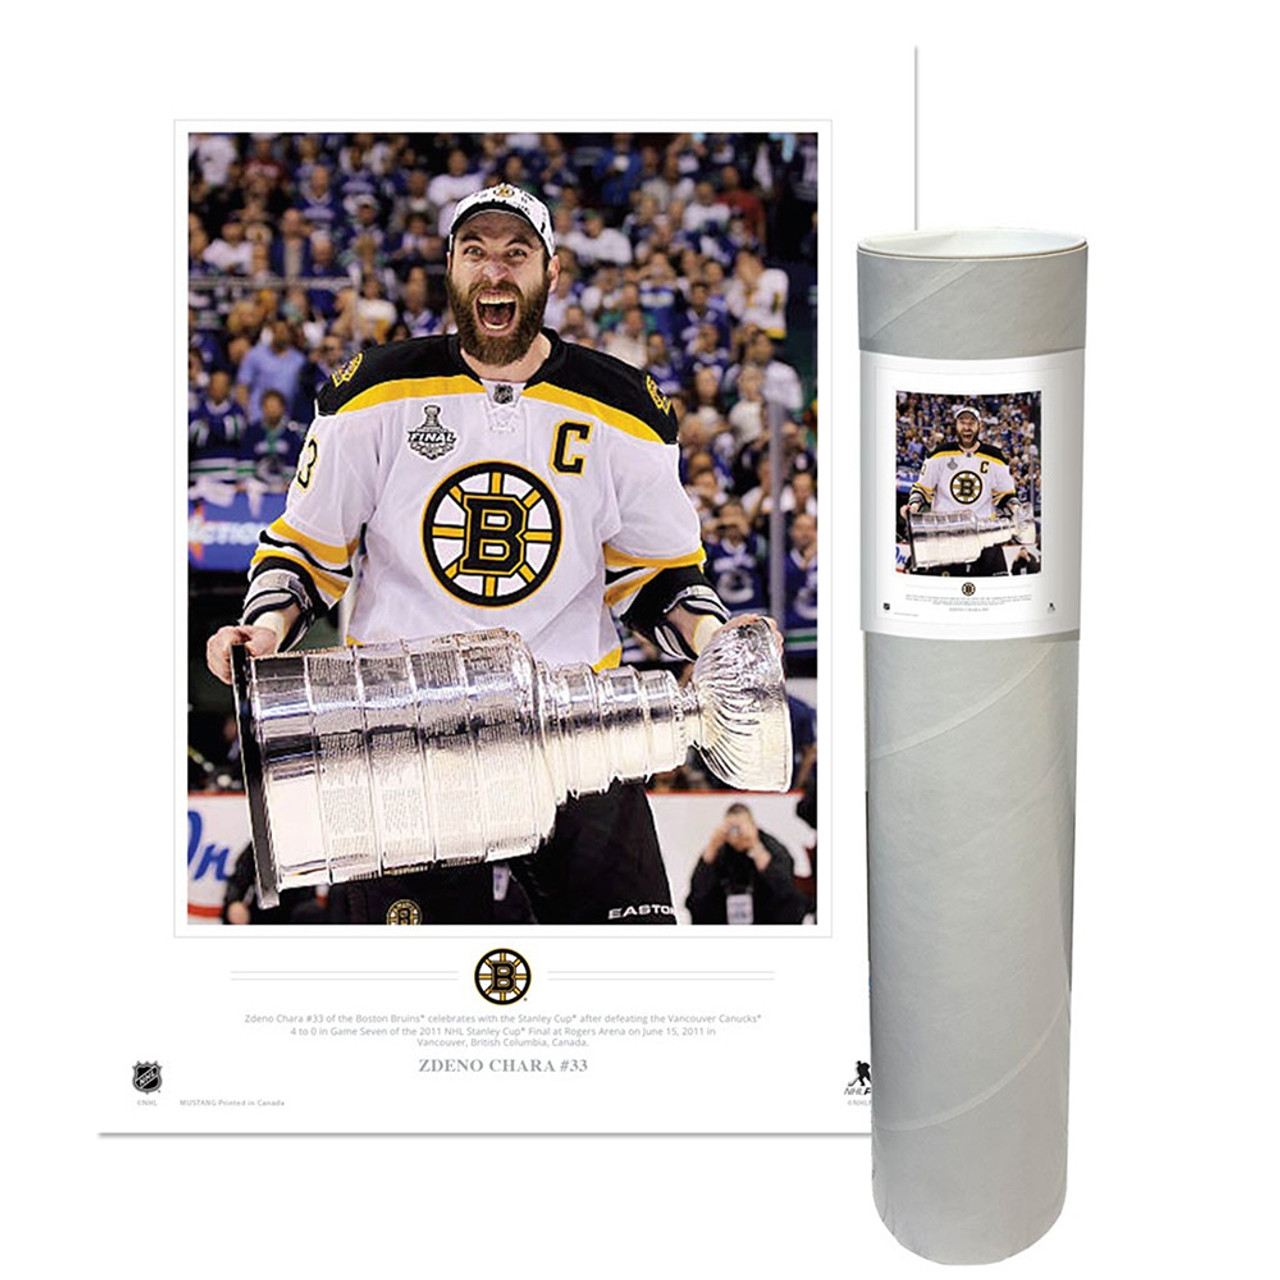 Boston Bruins Zdeno Chára Thank You For The Memories shirt, hoodie,  sweater, long sleeve and tank top